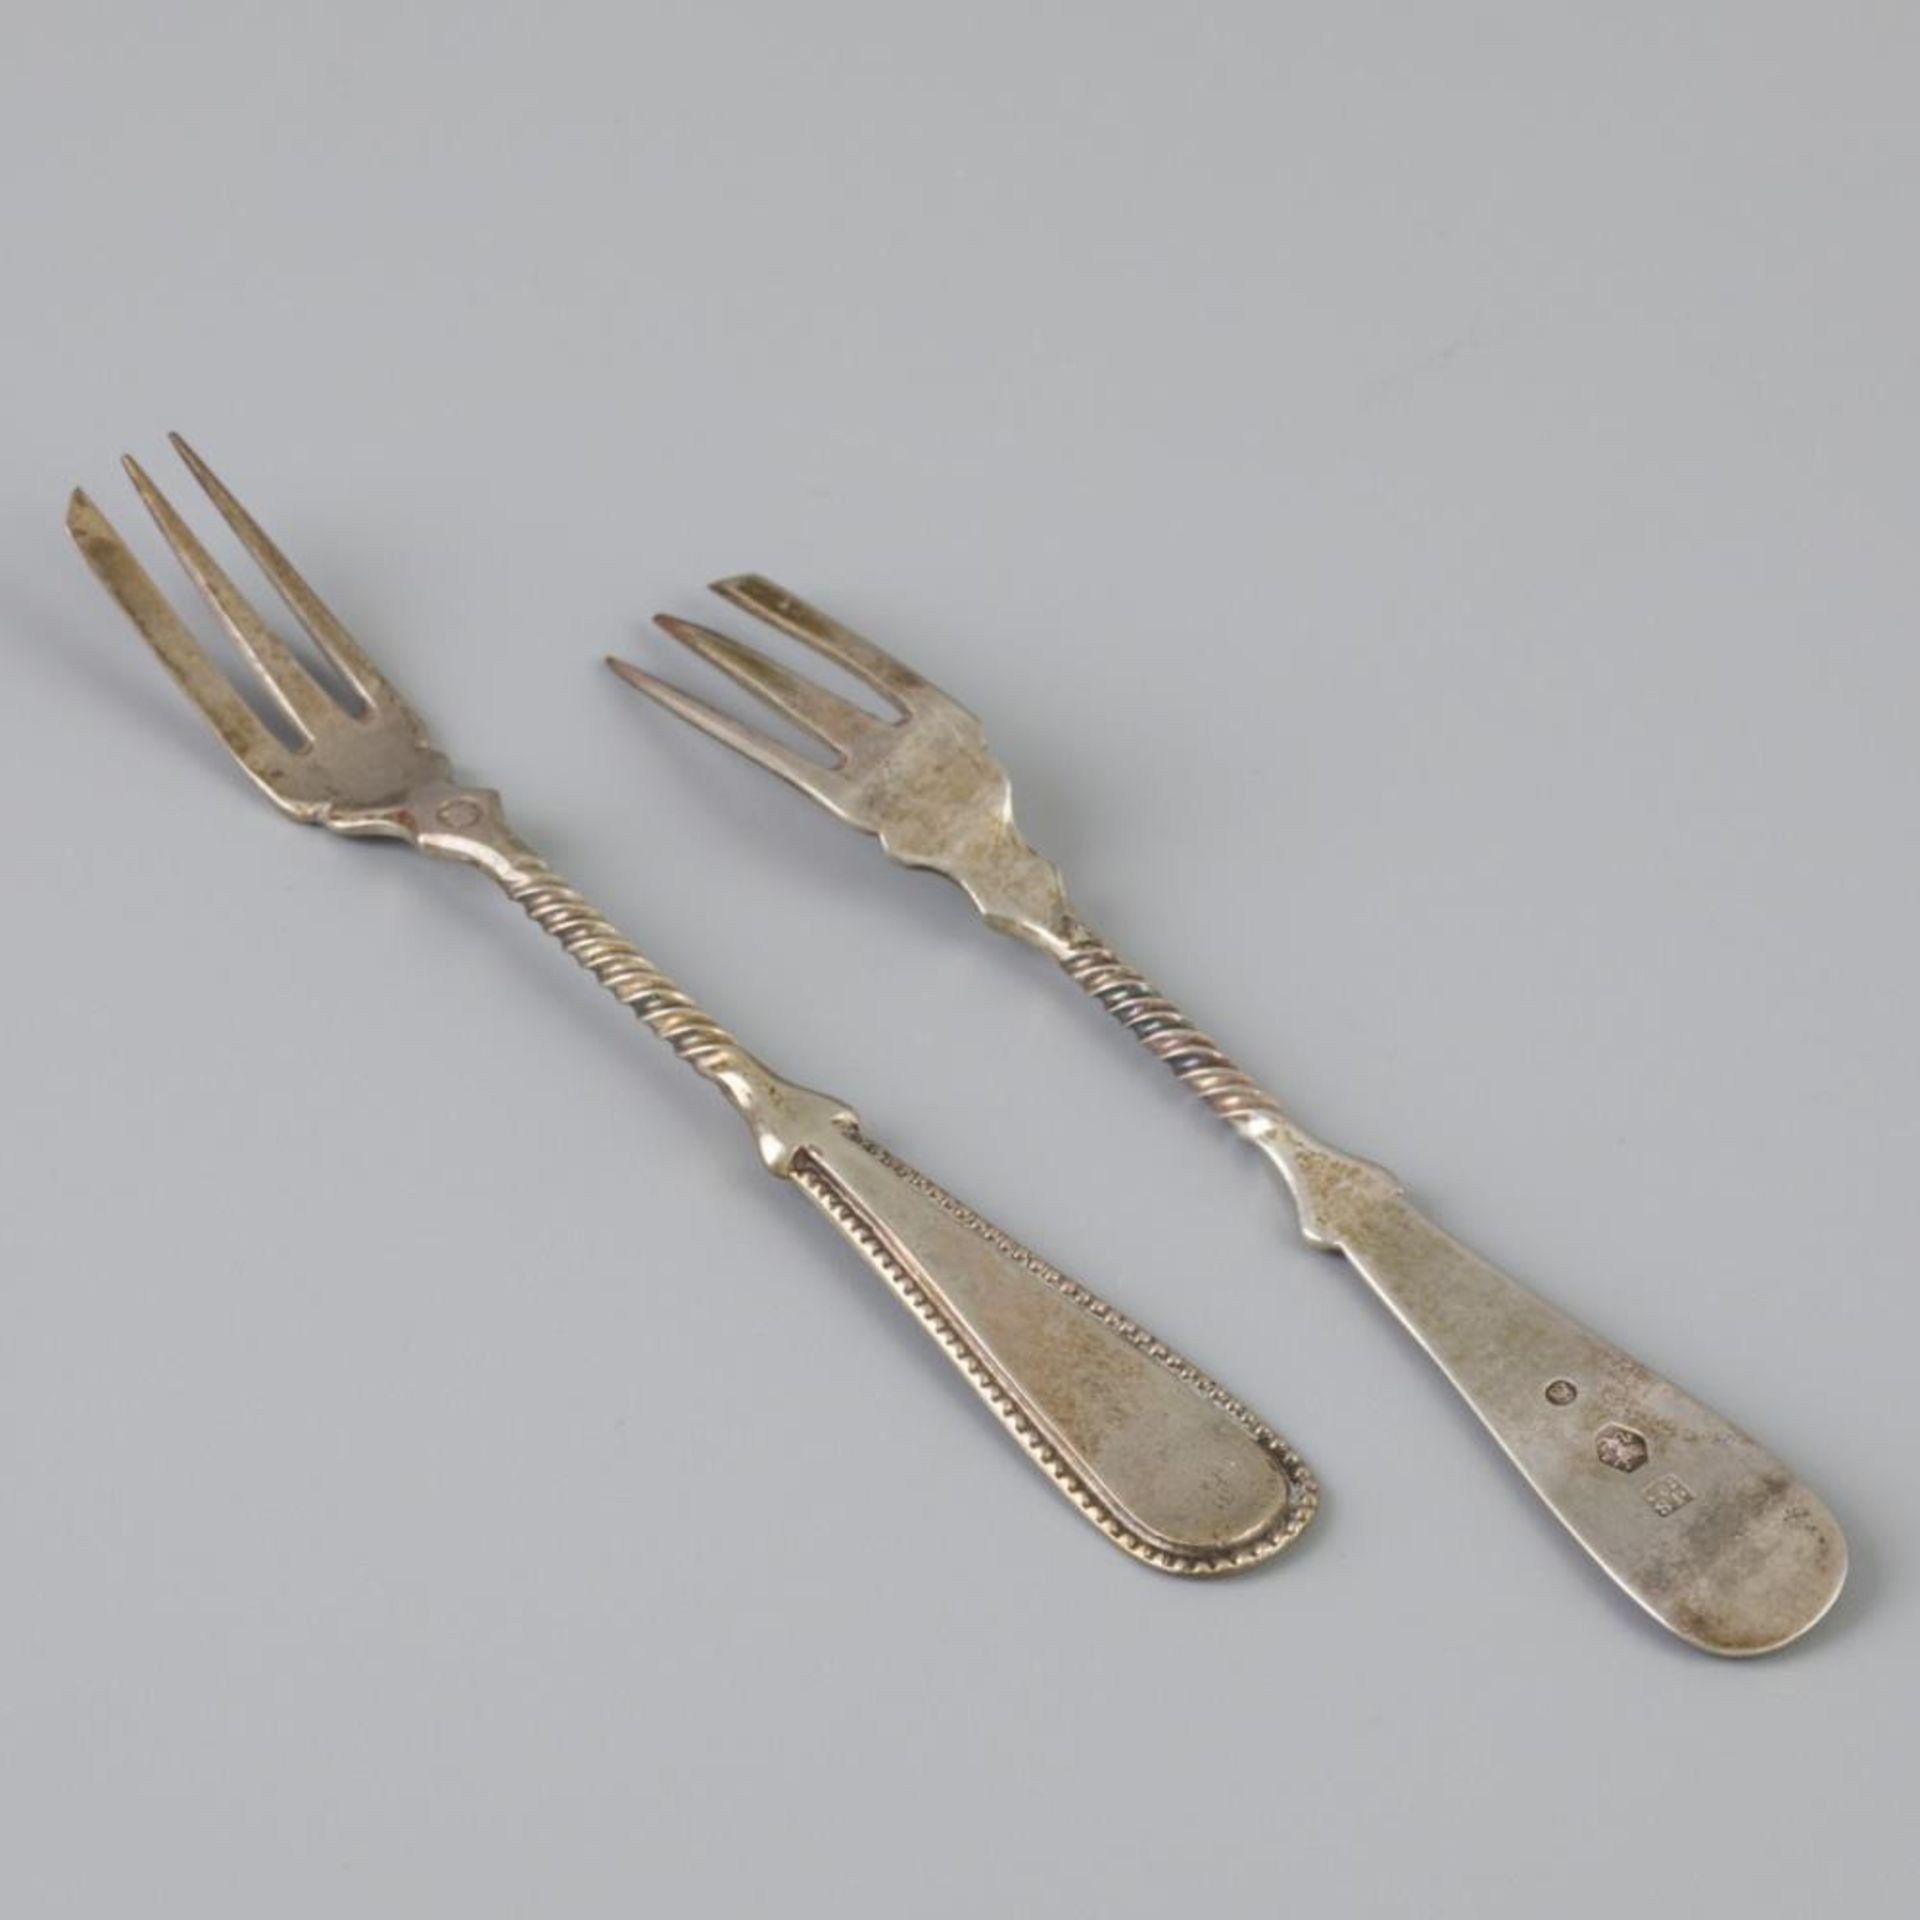 12 piece set silver pastry forks. - Image 3 of 4